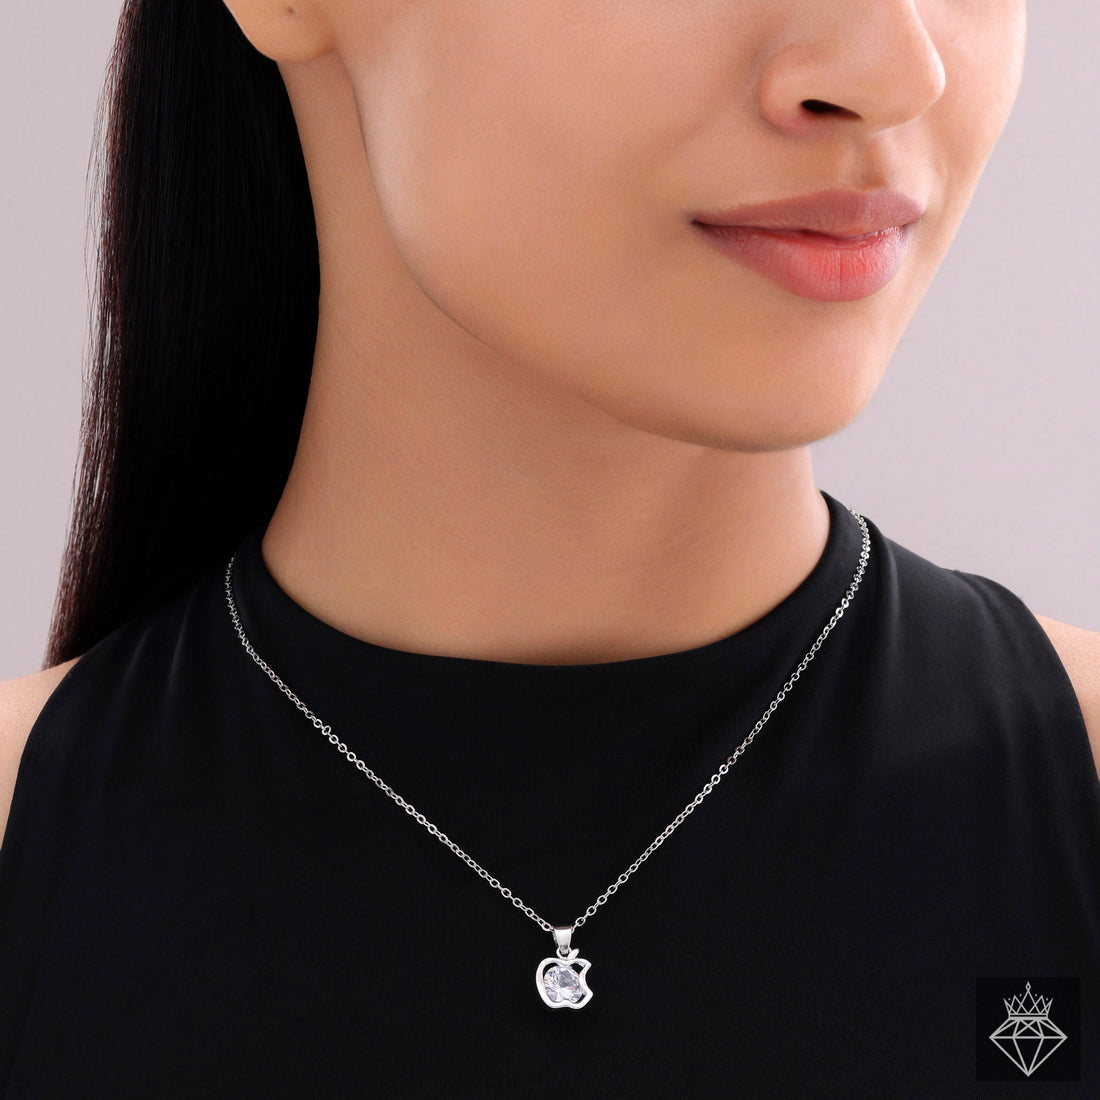 PRAO Twinkle Trend Crystal Solitaire in Apple Shape Pendant